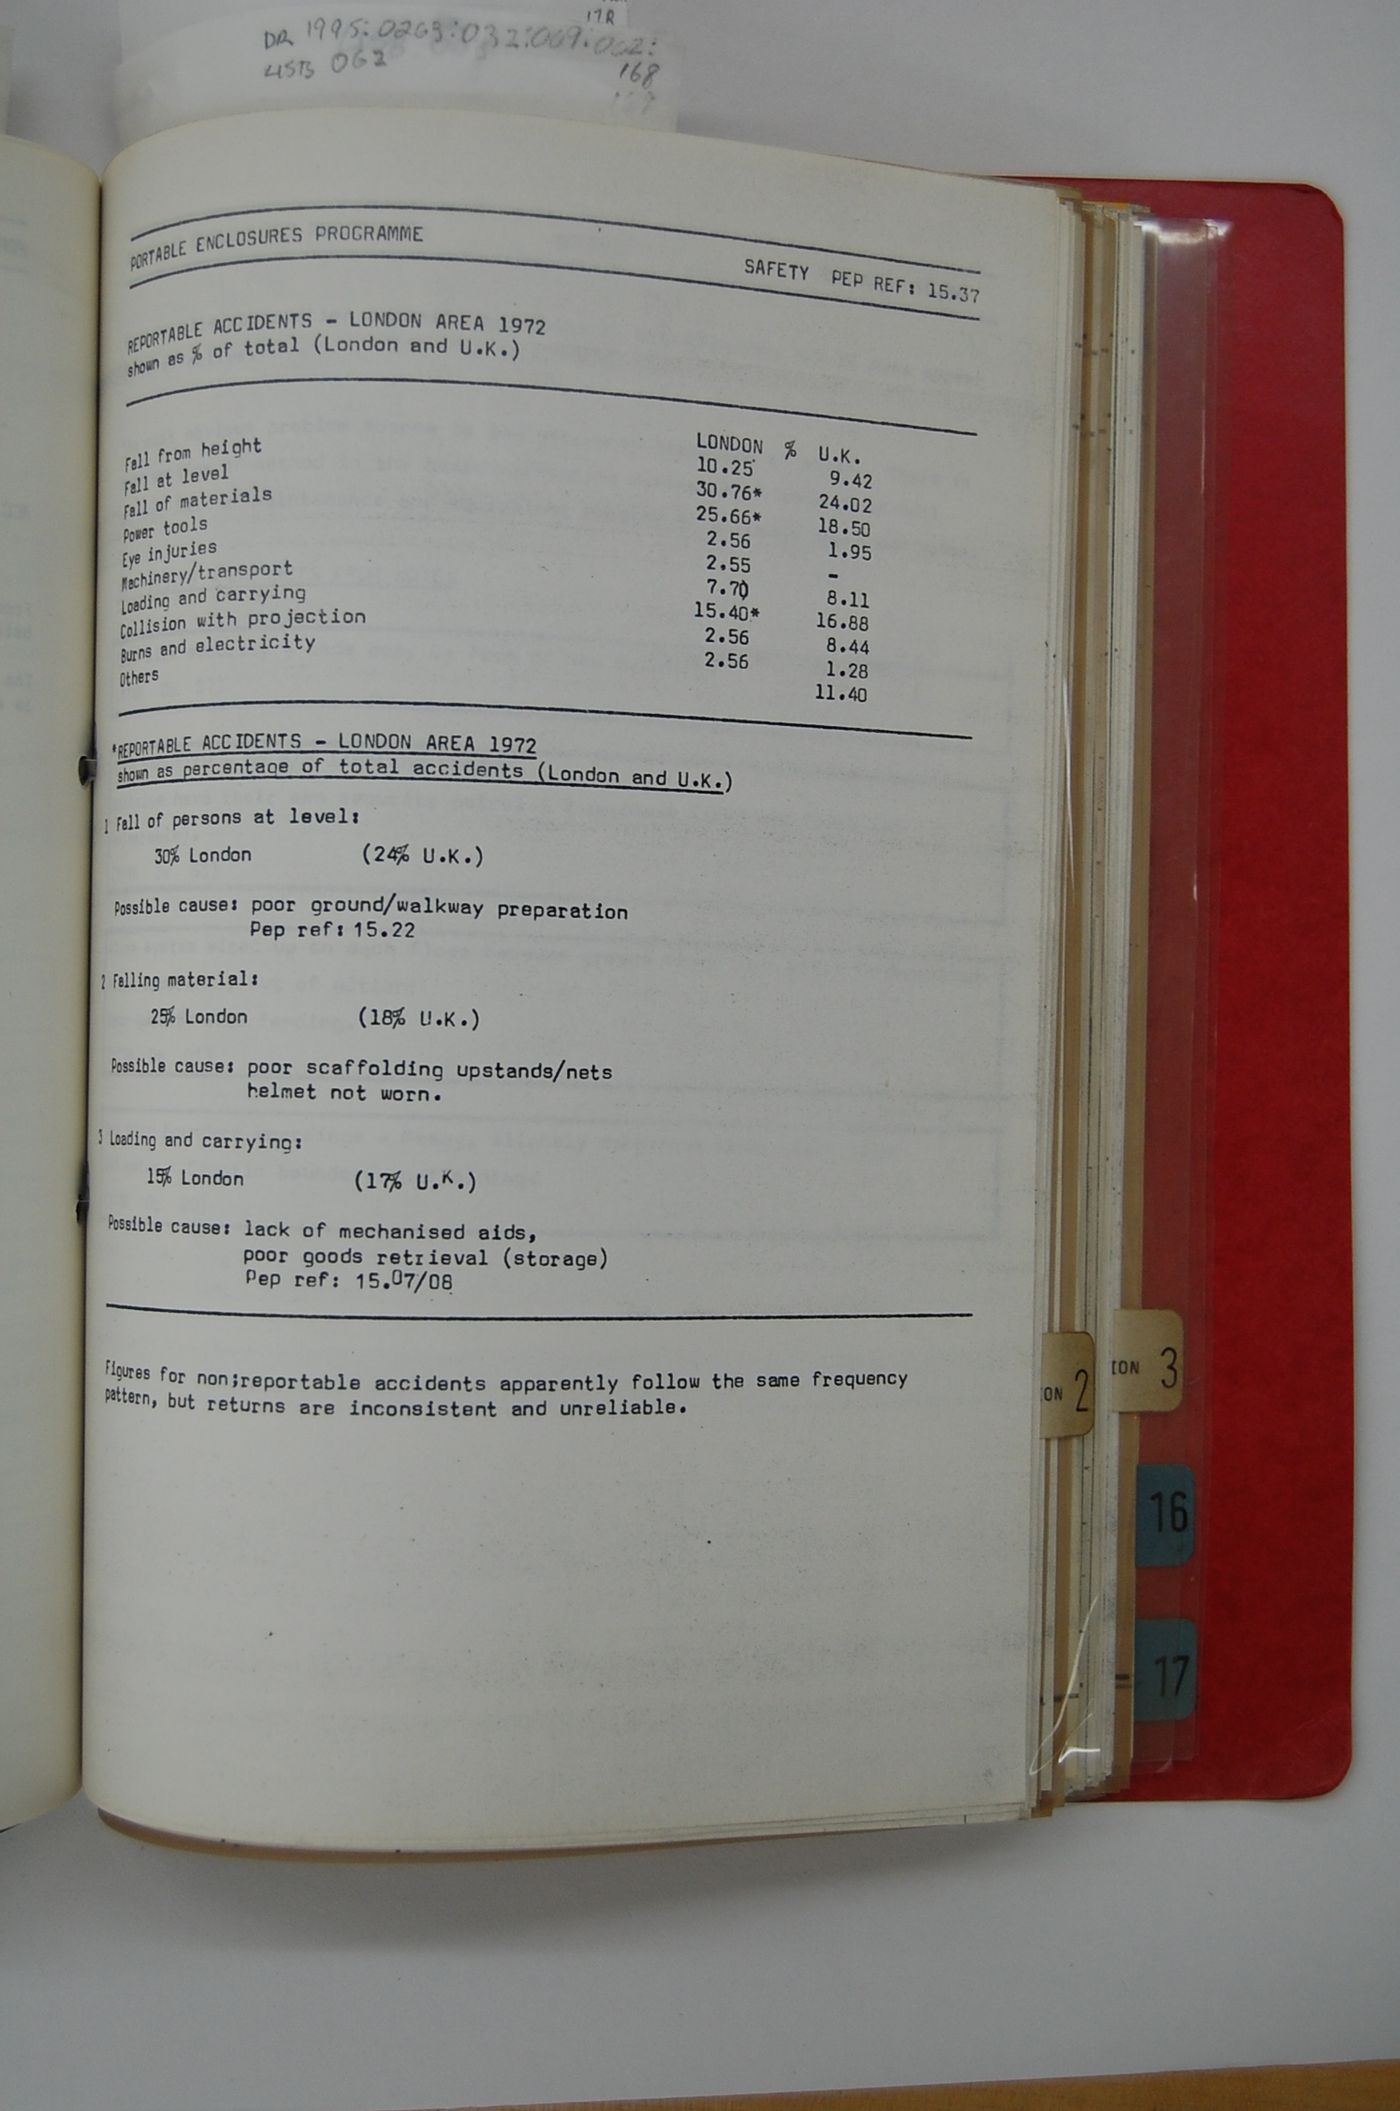 Accident statistics for the London Area for the year 1972 (from the McAppy report. Office copy, volume 1, chapter on the Portable Enclosures Program, section on Safety/Fire Equipment. PEP REF: 15.37)